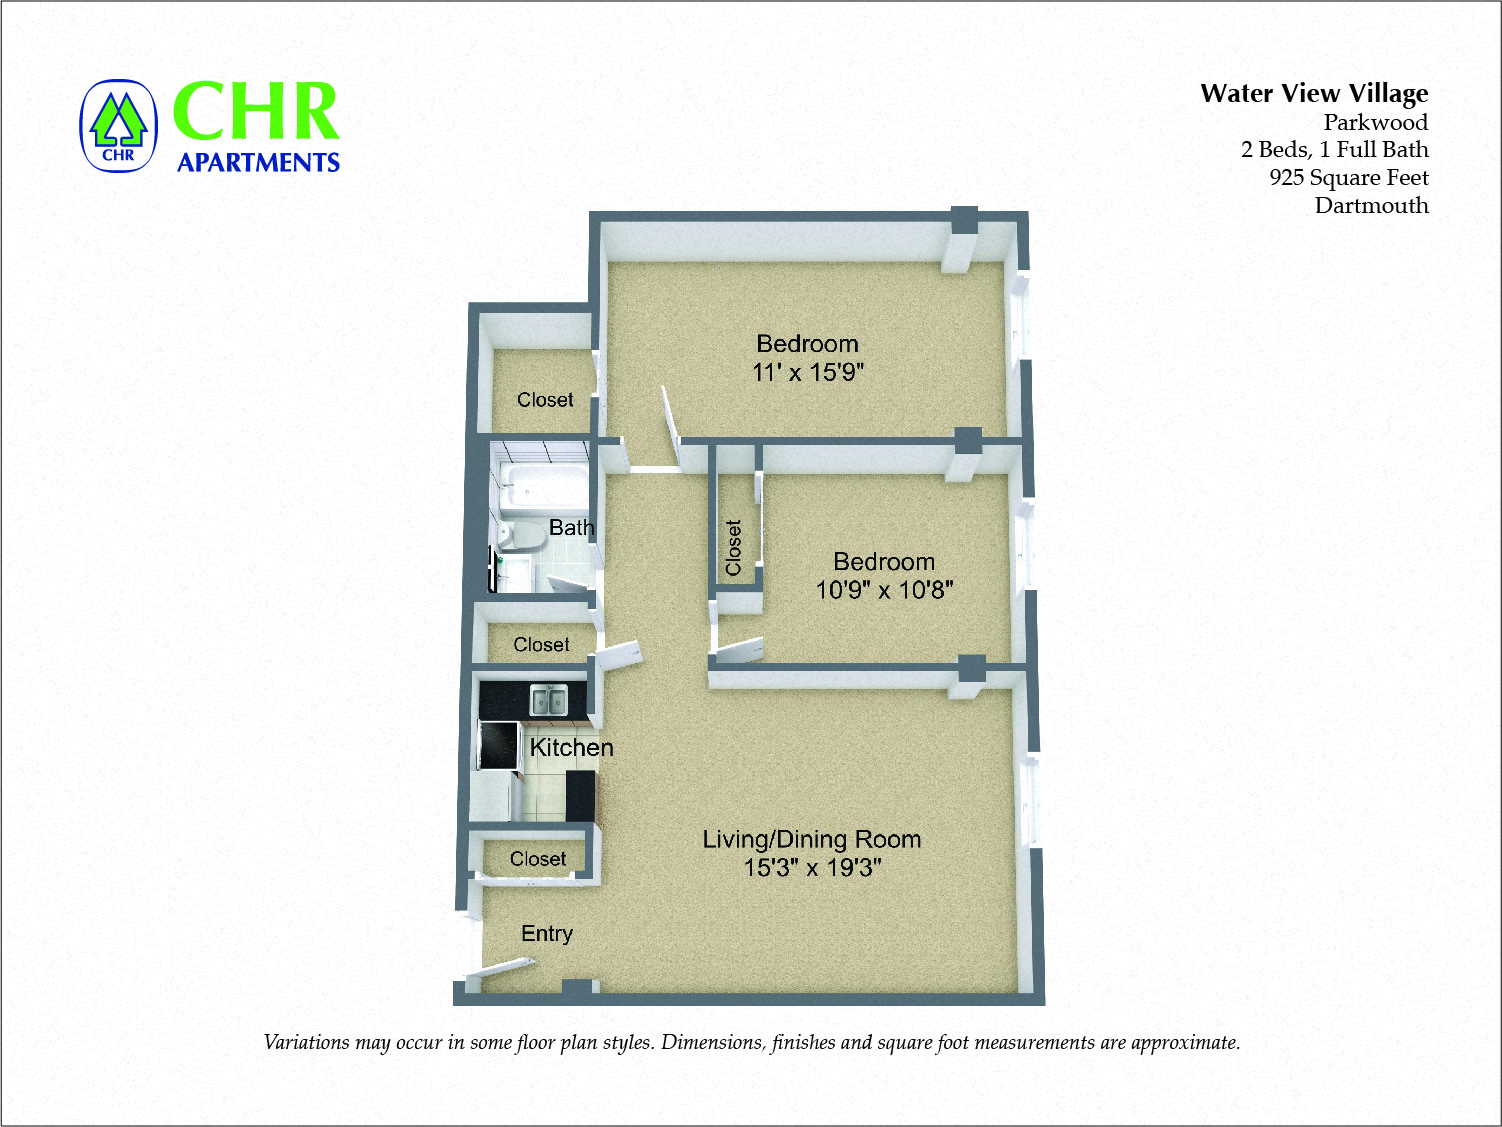 Click to view 2 Bed/1 Bath with Walk-In Closet floor plan gallery